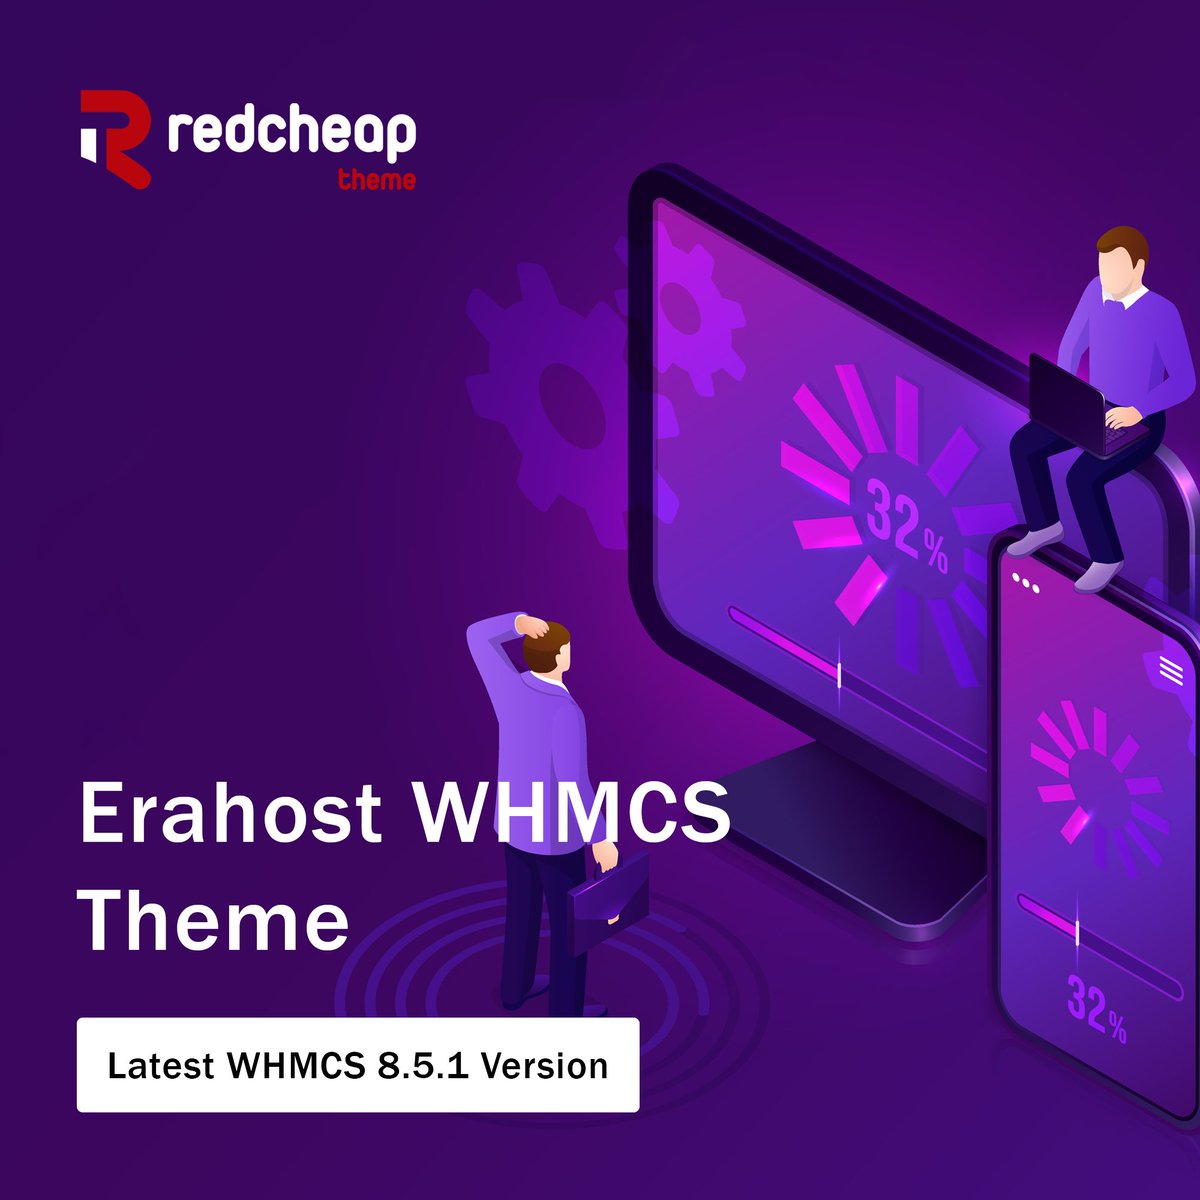 We are excited to share the Erahost WordPress Theme including the Latest WHMCS 8.5.1 Version.

#WHMCSTheme #LatestWHMCSVersion #WHMCSTemplates

rctheme.com/erahost-wordpr…